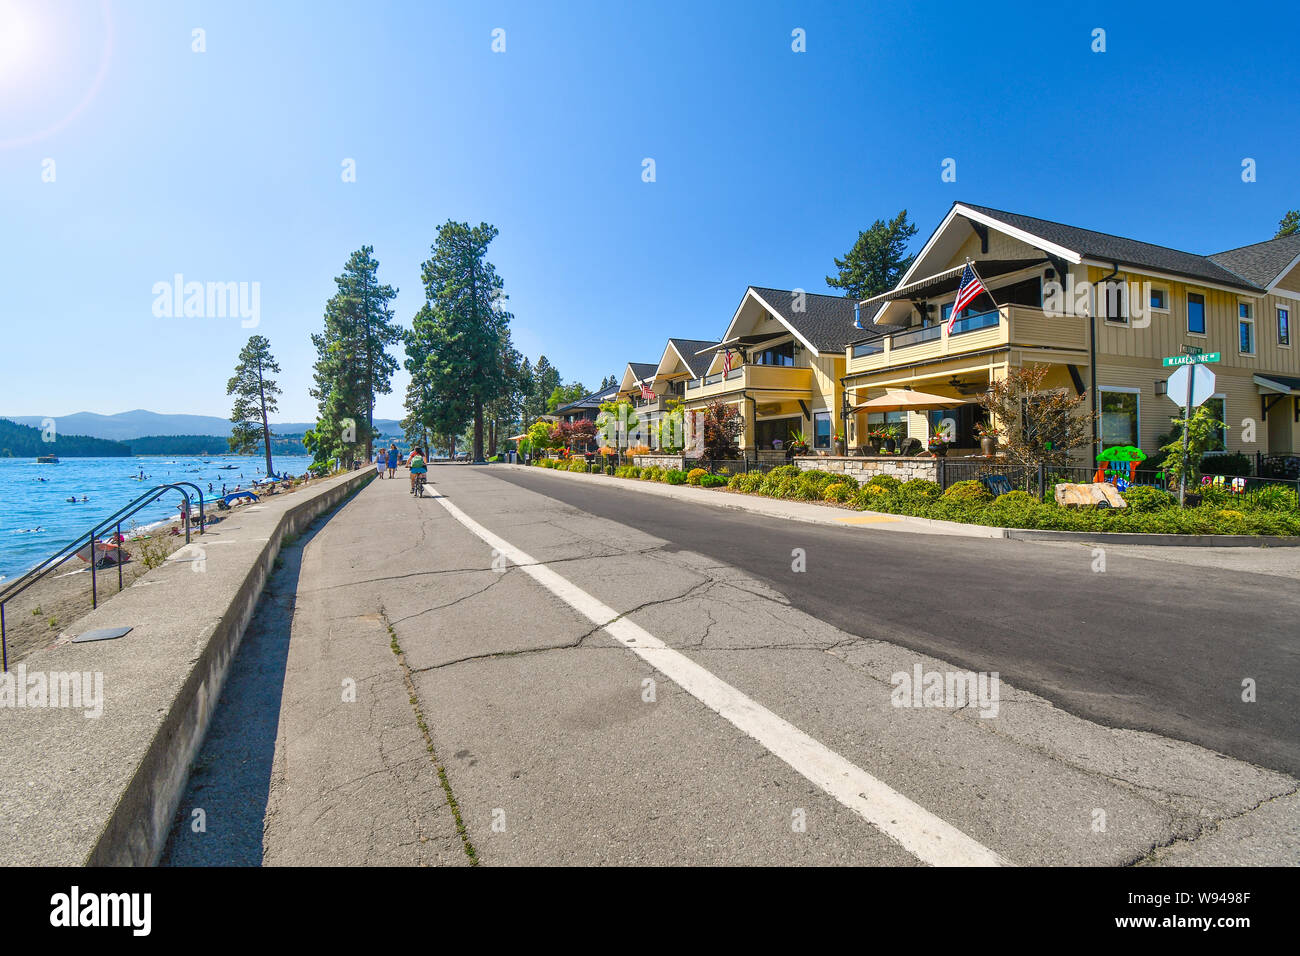 A waterfront high end luxury townhome complex across the street from Lake Coeur d'Alene, in the mountain resort city of Coeur d'Alene, Idaho. Stock Photo